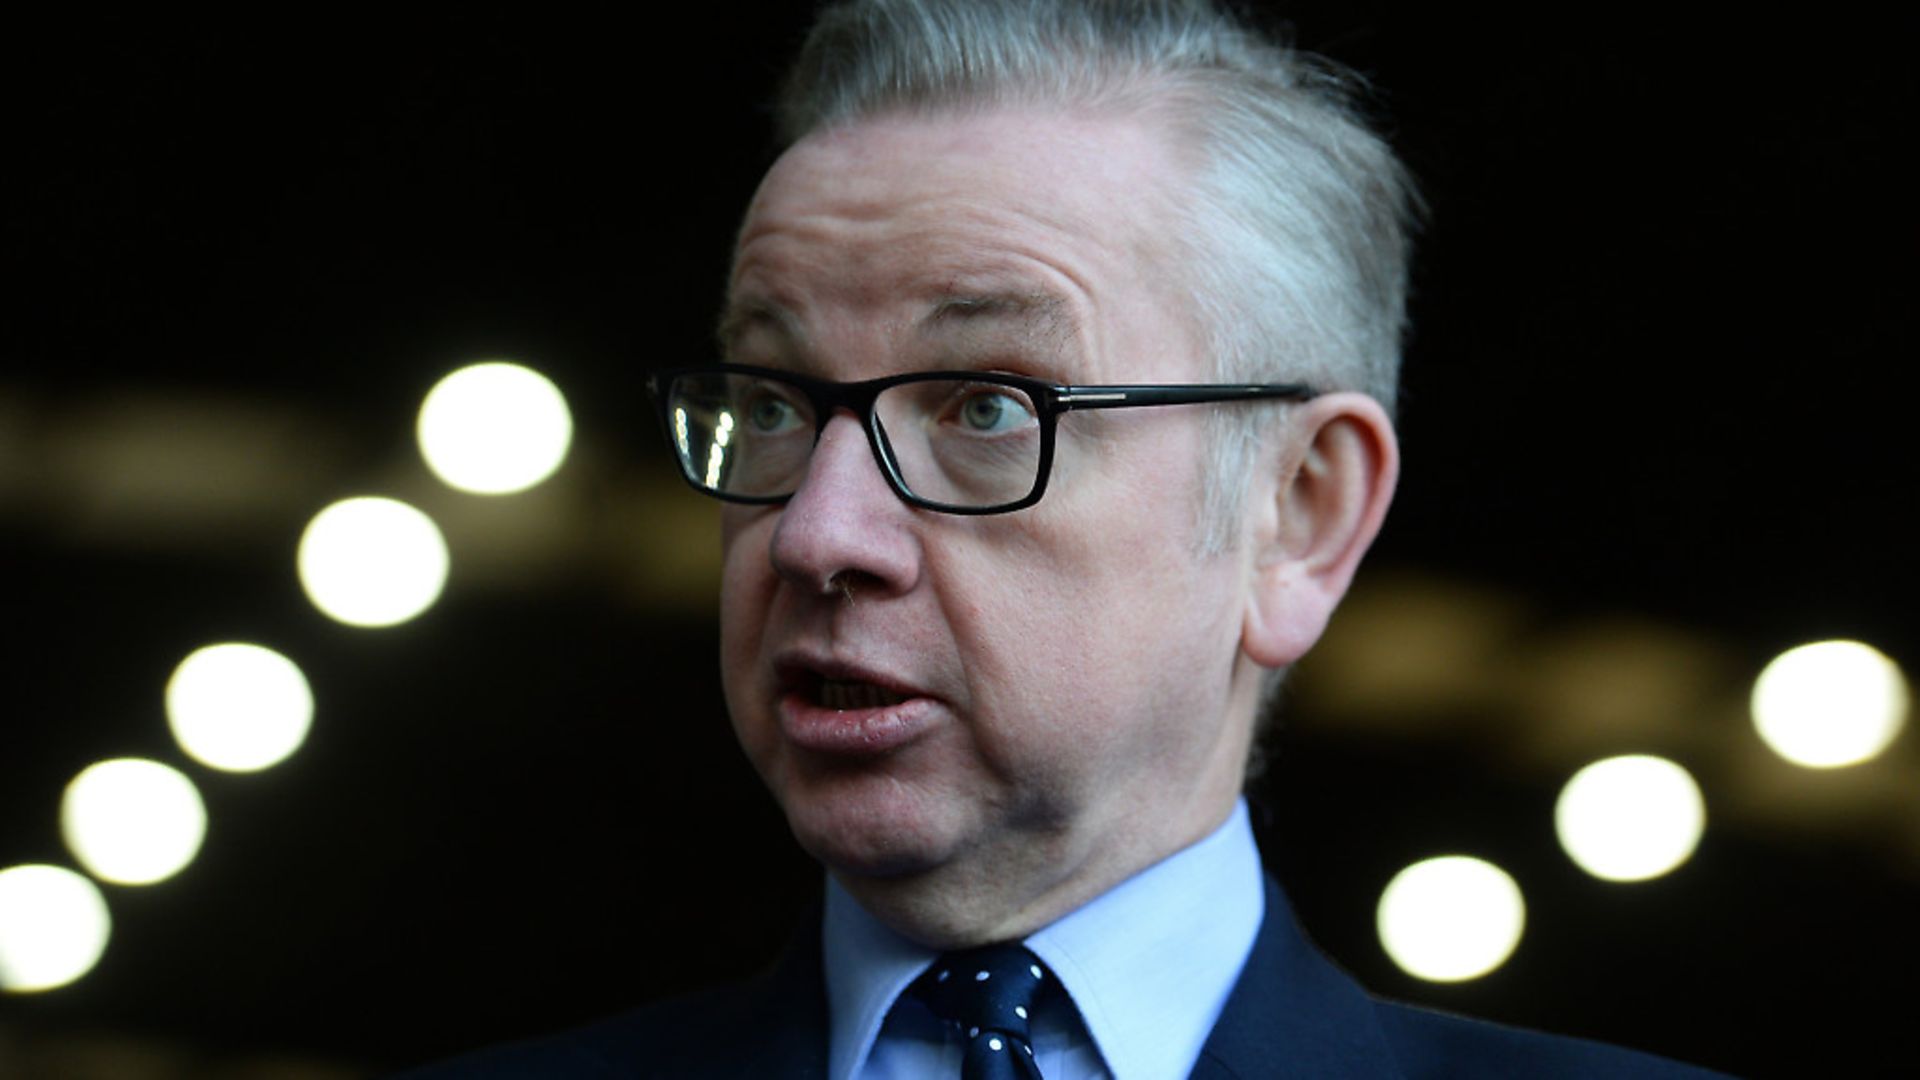 The Arts Club in Mayfair decided to grant honorary membership to cabinet minister Michael Gove and his wife Sarah Vine, the Daily Mail columnist. Photo: PA Wire/PA Images - Credit: PA Wire/PA Images